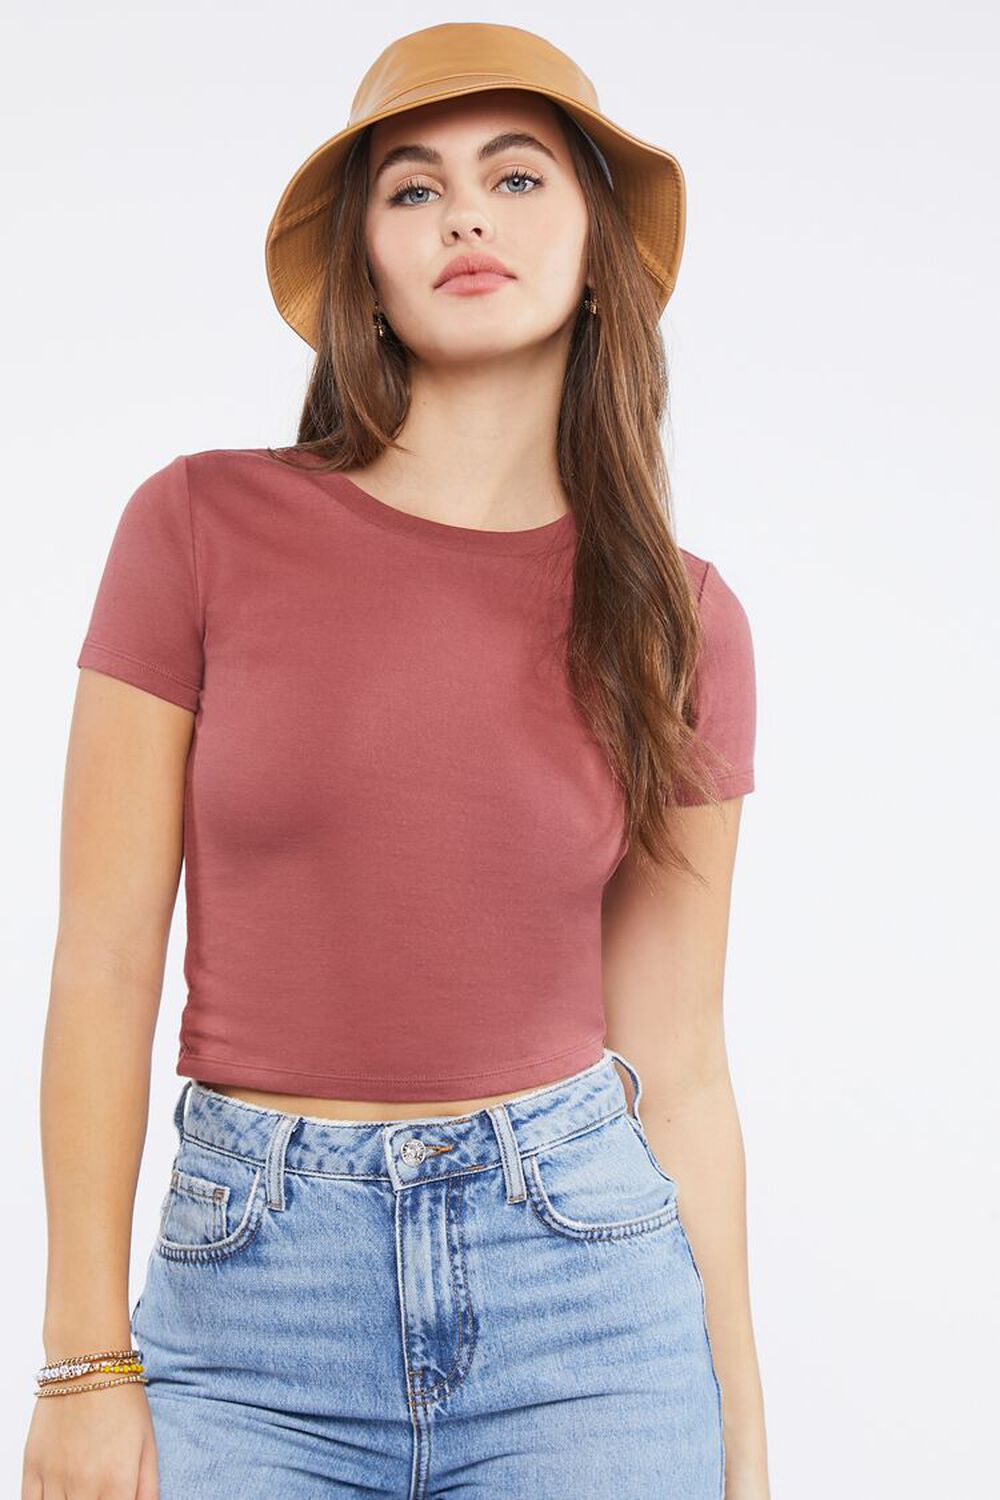 CURRANT Crew Neck Cropped Tee, image 1